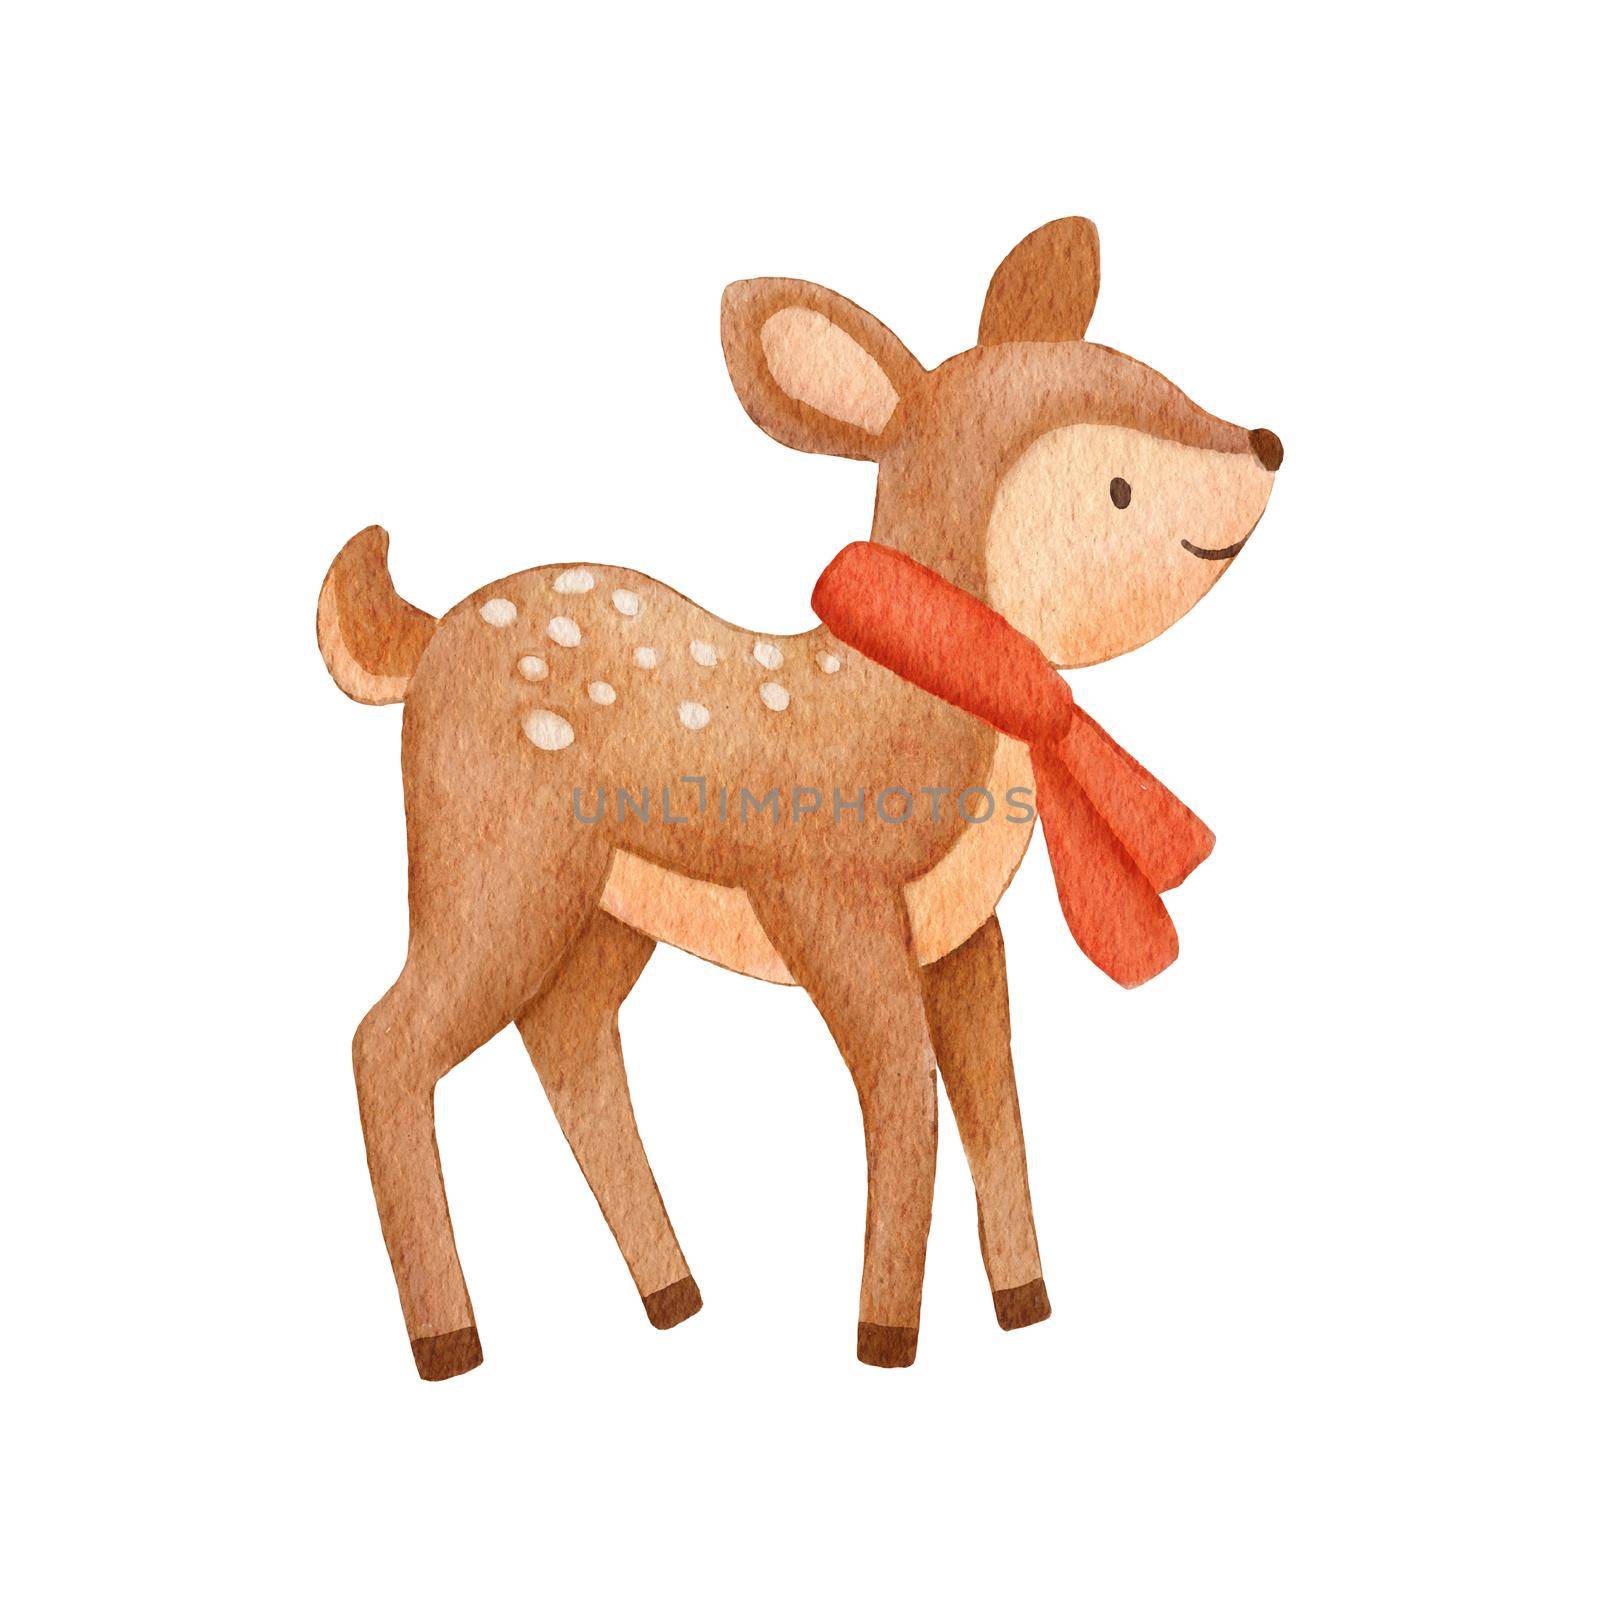 Watercolor Baby Deer character with scarf. Hand drawn cute fawn. Cartoon illustration isolated on white. by ElenaPlatova